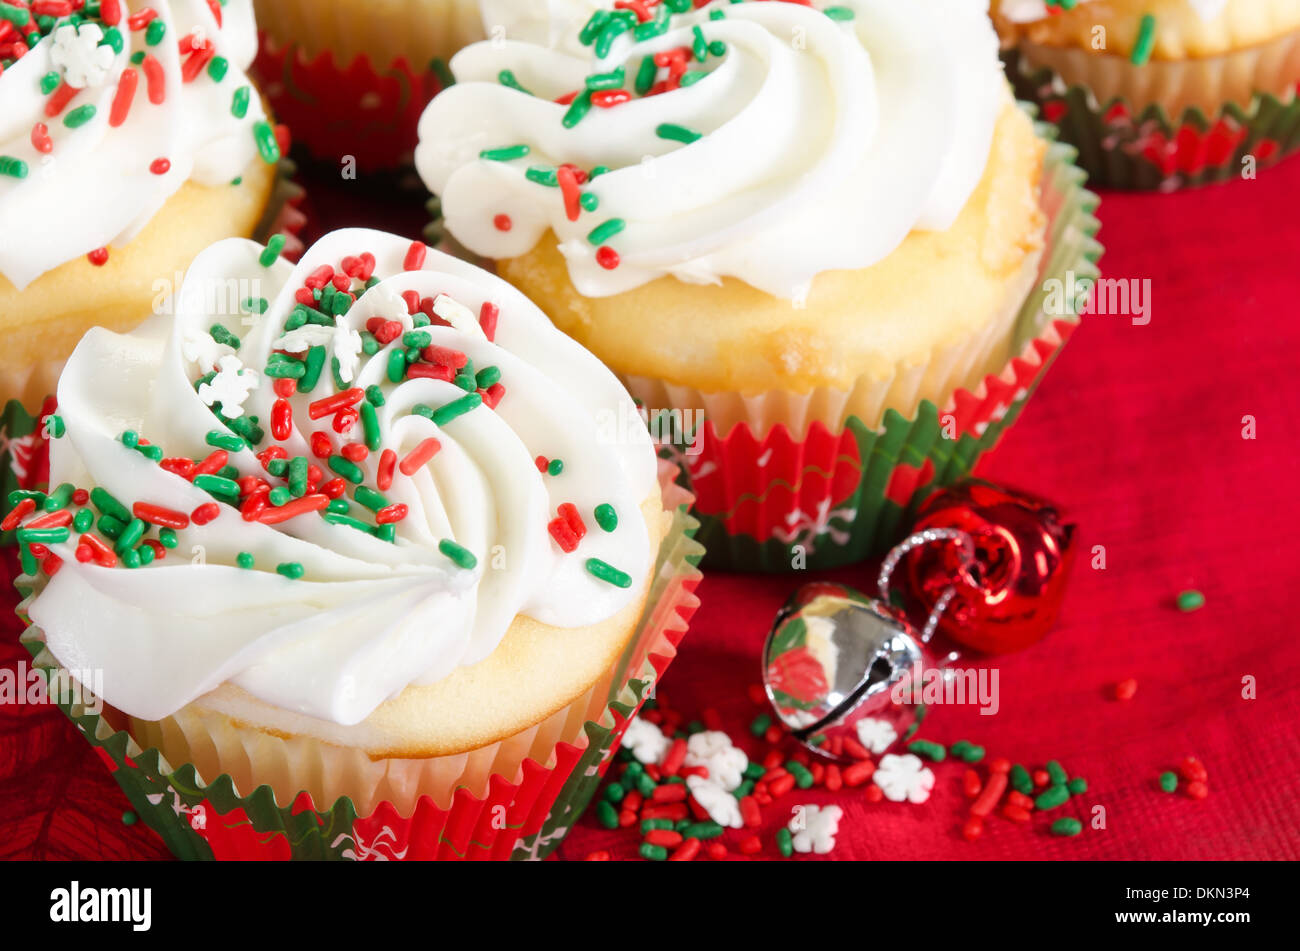 Holiday cupcakes with vanilla frosting and red and green sprinkles. Red holiday background with Christmas bells. Stock Photo